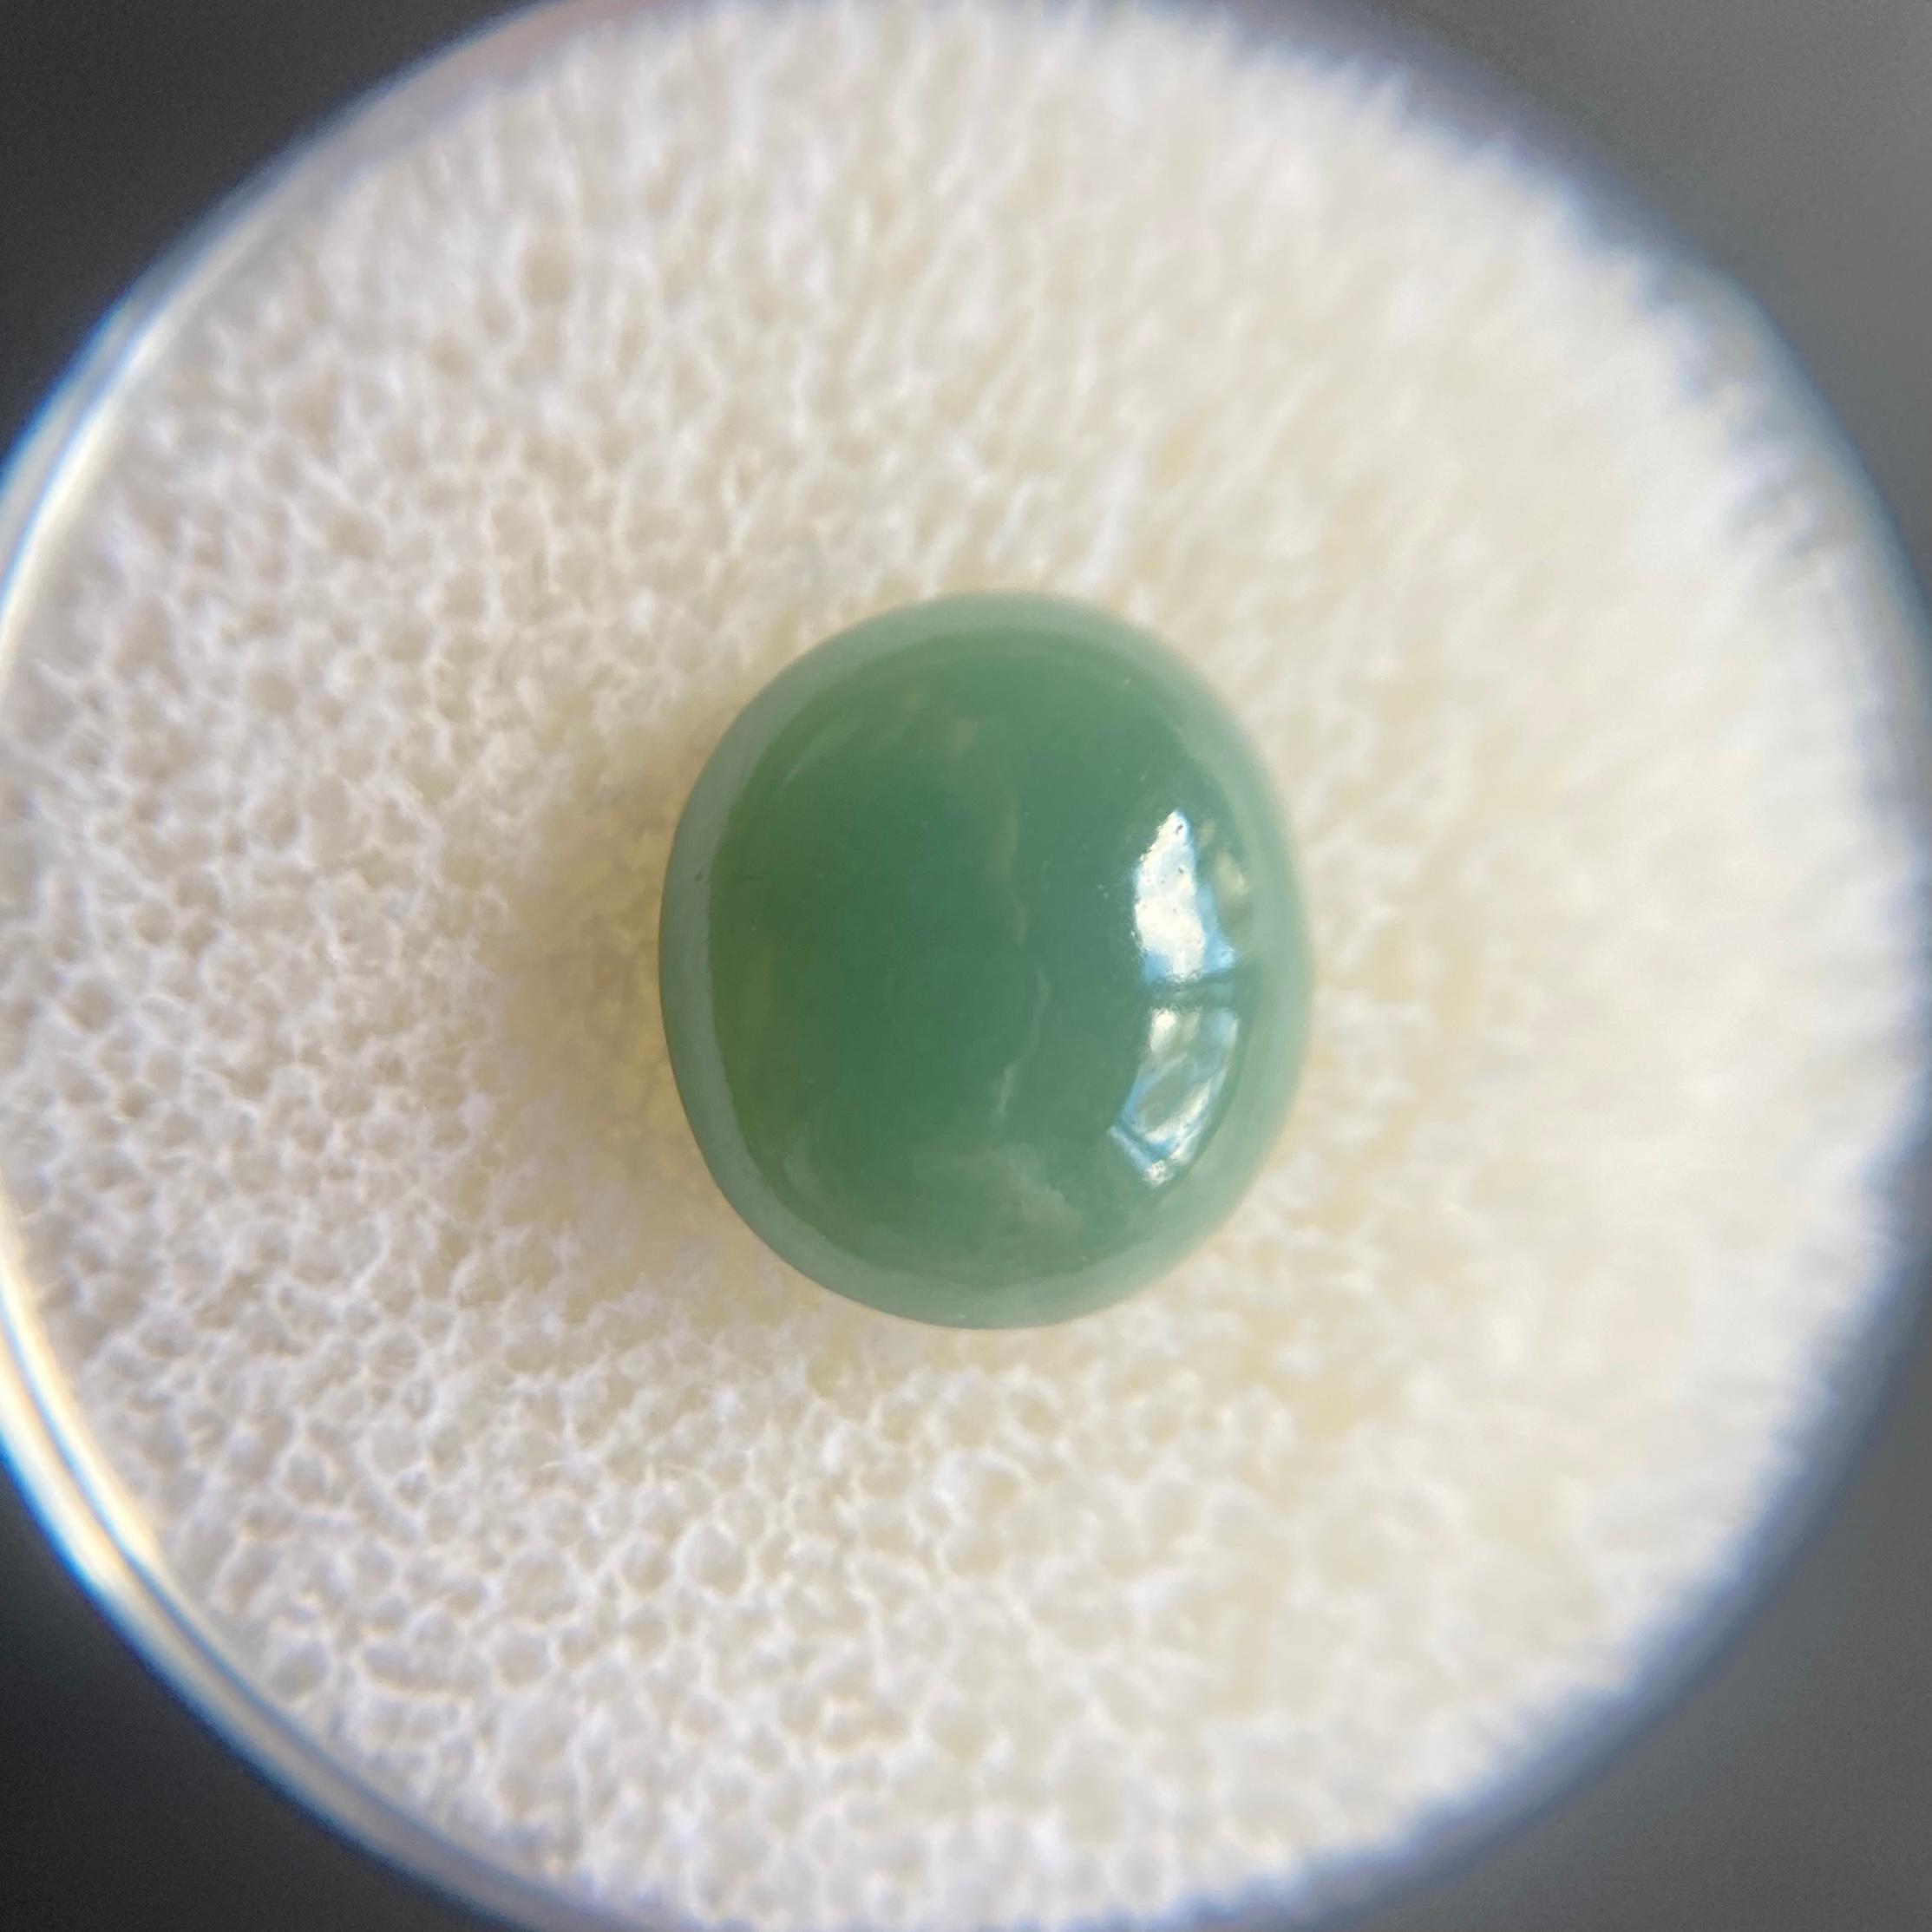 Natural A Grade Jadeite Gemstone.

3.41 Carat with an excellent oval cabochon cut. Fully certified and by IGI in Antwerp.

Totally untreated Jadeite jade, referred to as ‘A’ grade in the trade. Mined in Burma, source of the finest jade.

No nicks or